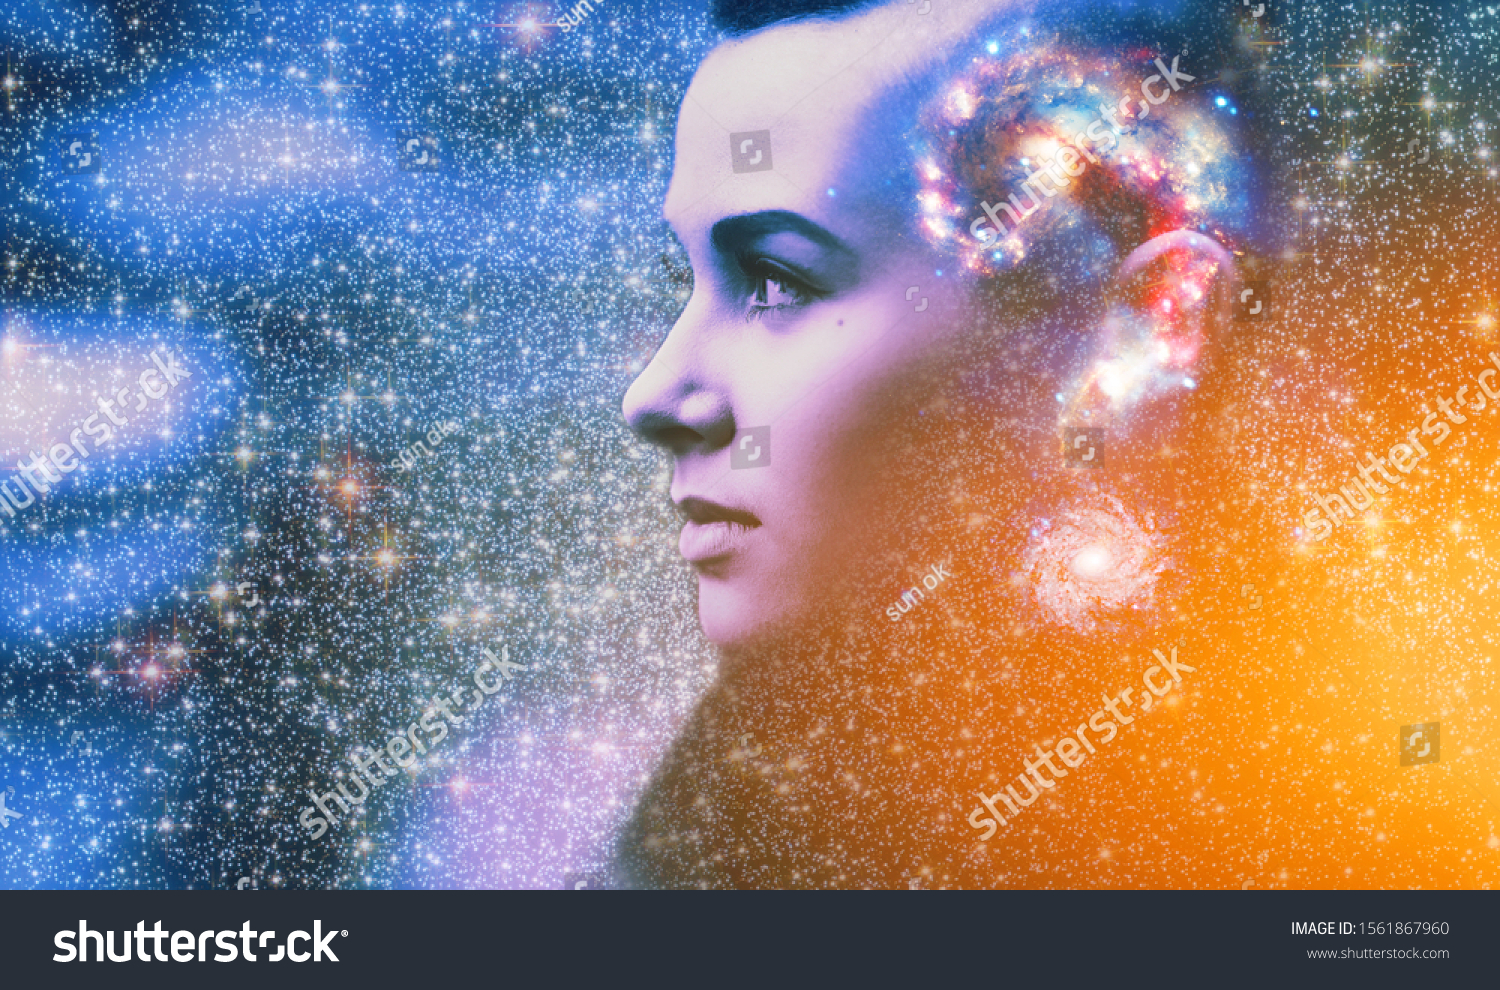 Double multiply exposure abstract portrait of young woman face with galaxy universe space inside head. Human mind spirit, ai brain, astronomy, ask question answer concept Elements image furnished NASA #1561867960